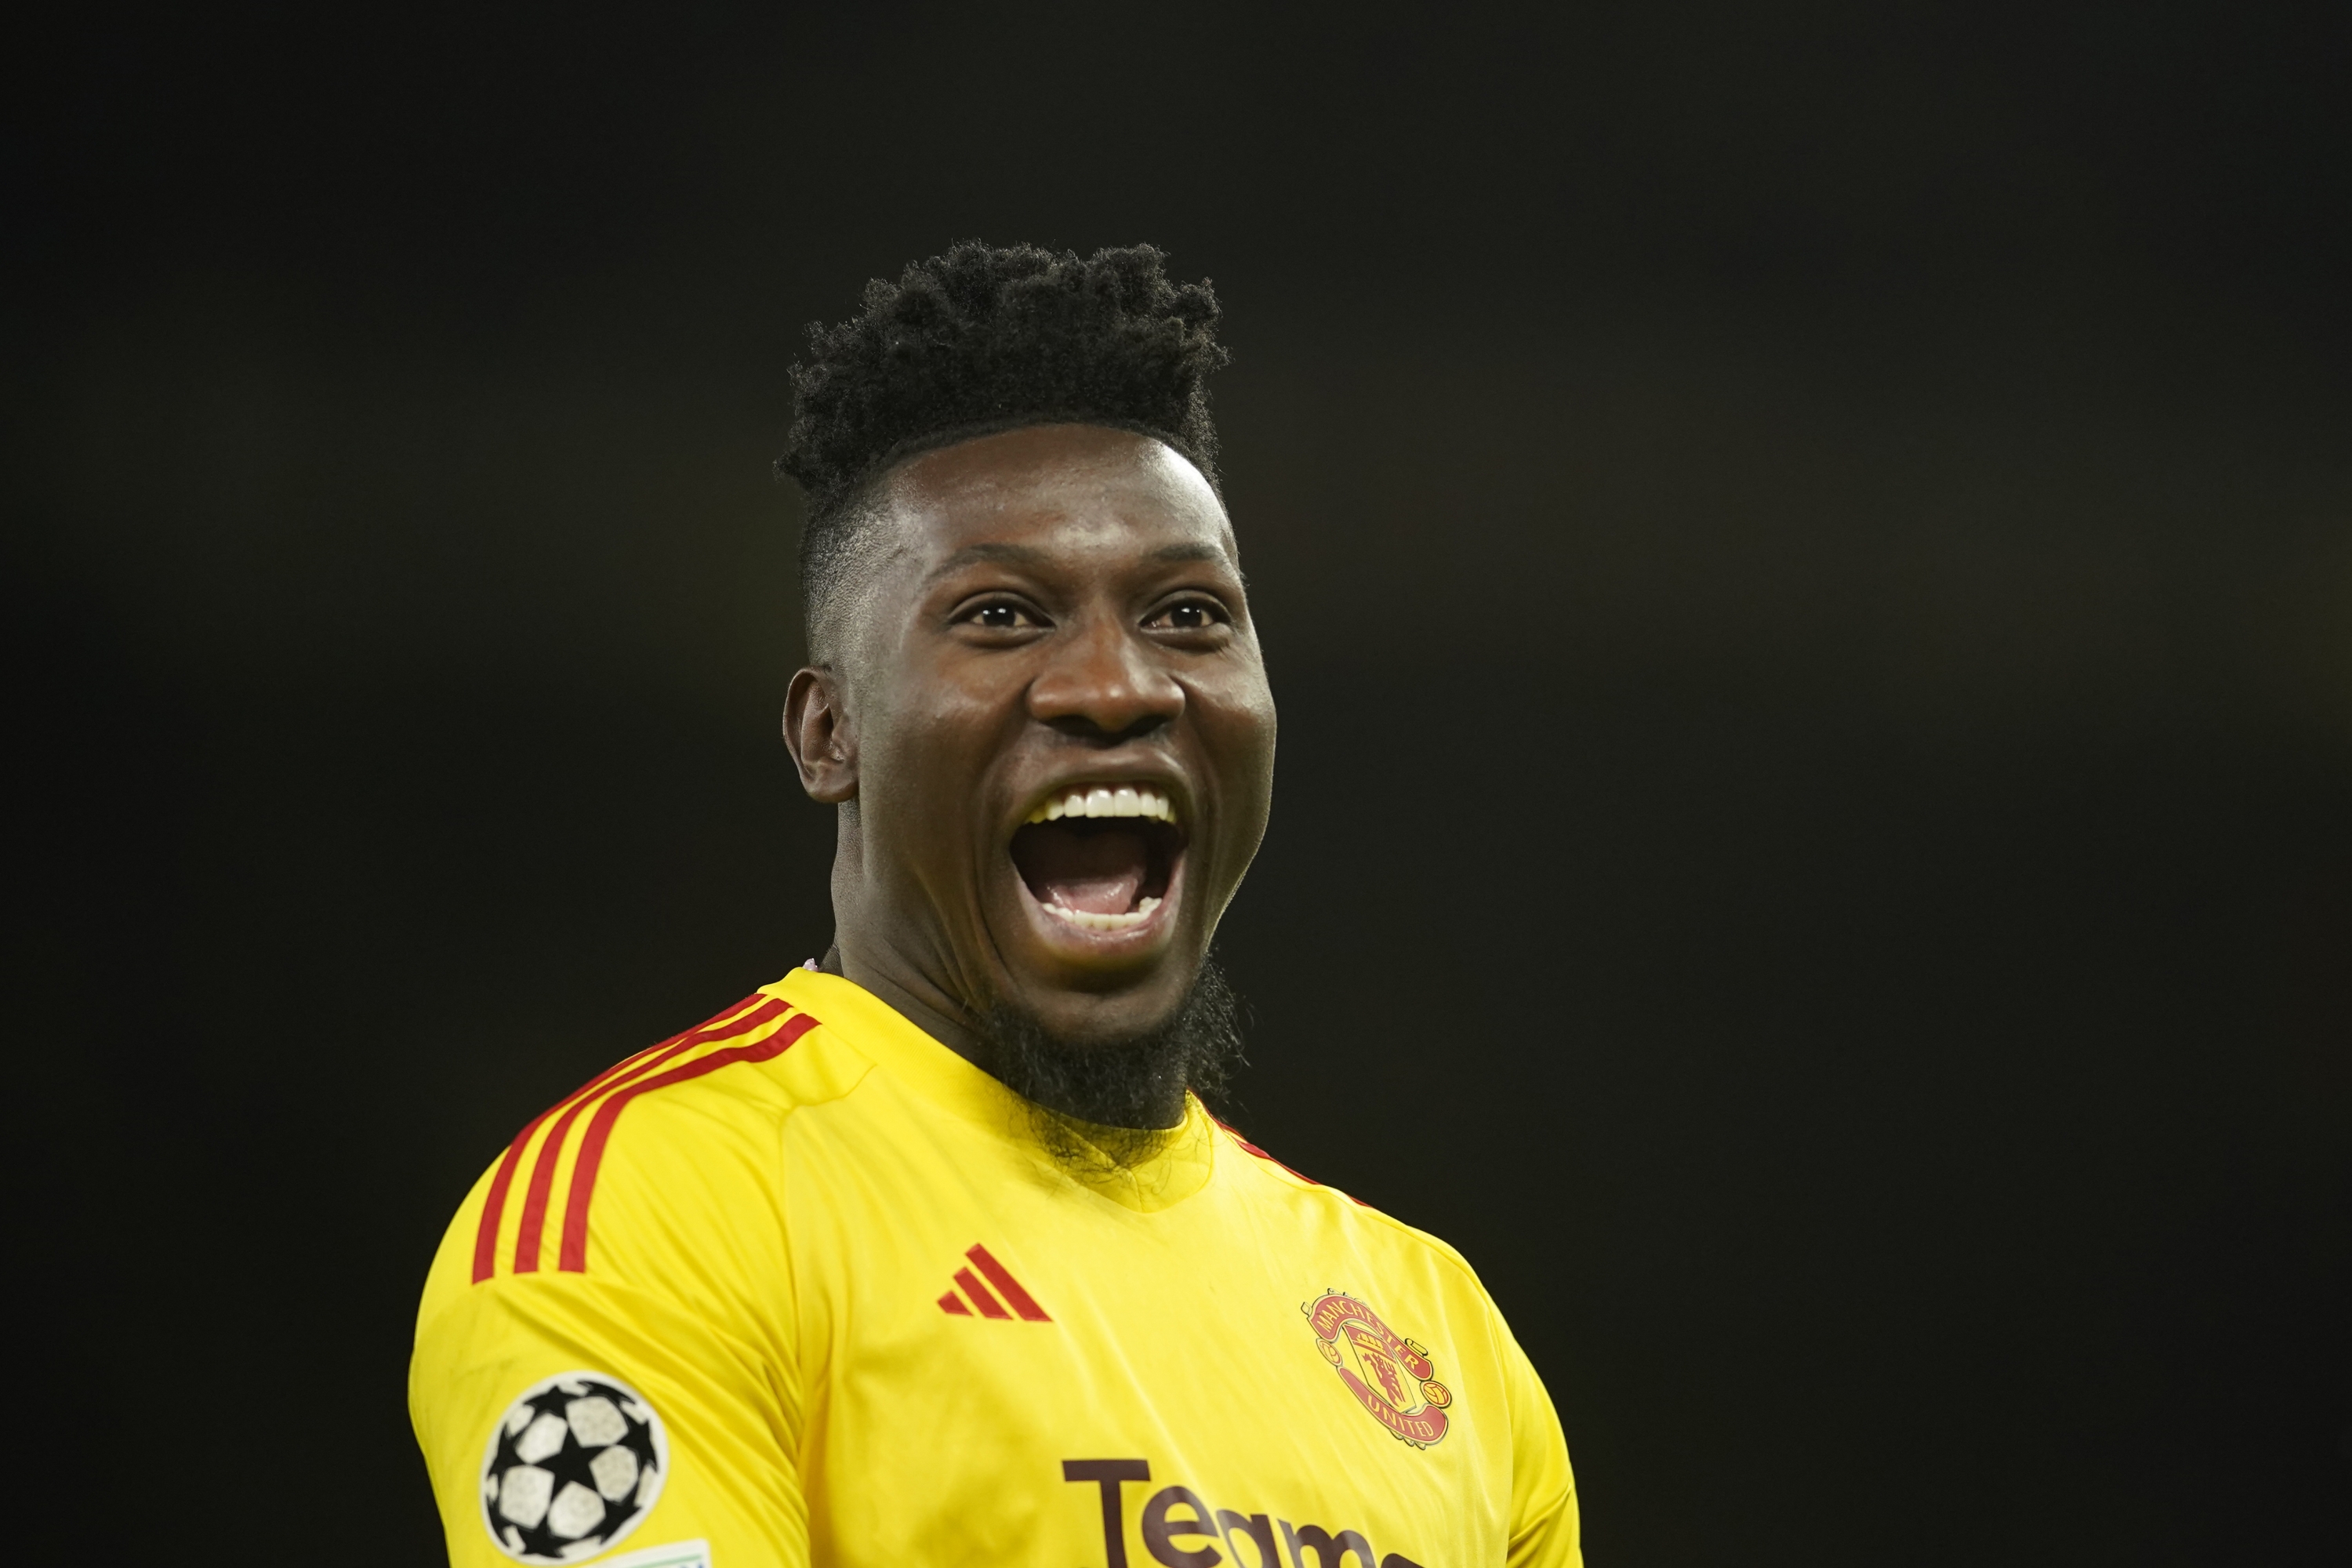 Manchester United's goalkeeper Andre Onana reacts during the Champions League group A soccer match between Manchester United and Galatasaray at the Old Trafford stadium in Manchester, England, Tuesday, Oct. 3, 2023. (AP Photo/Dave Thompson)